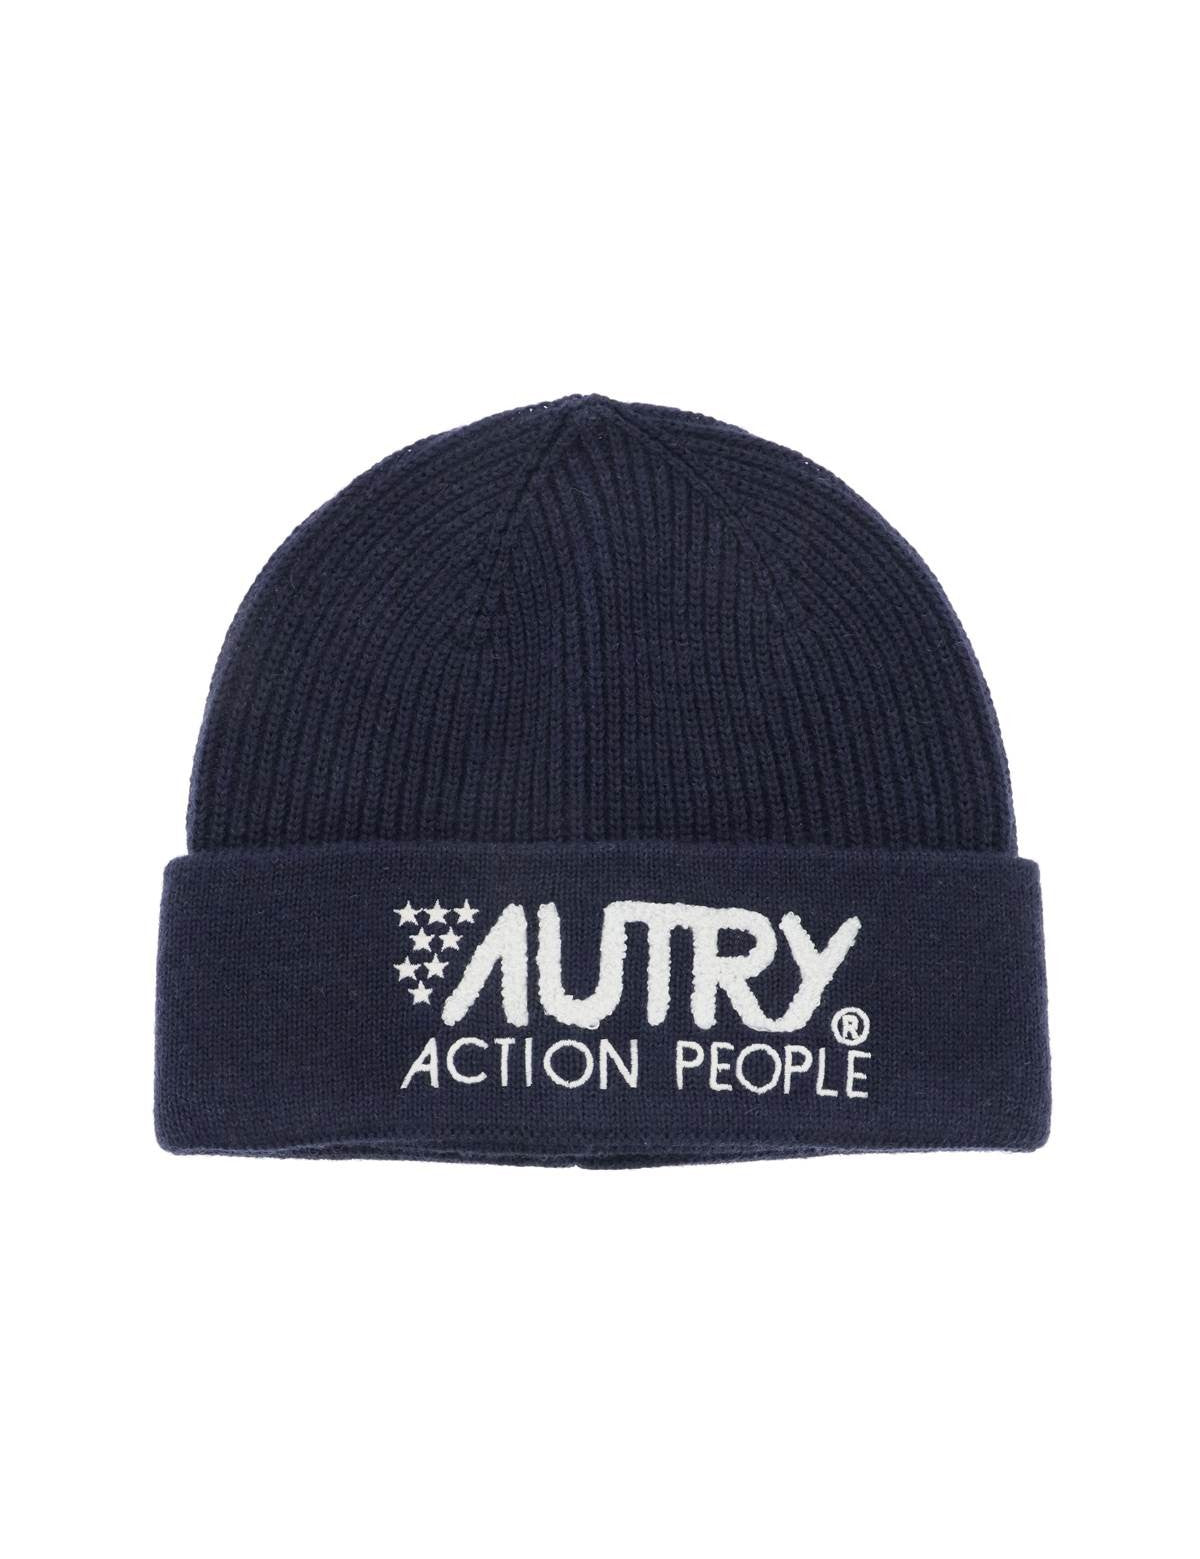 autry-beanie-hat-with-embroidered-logo.jpg